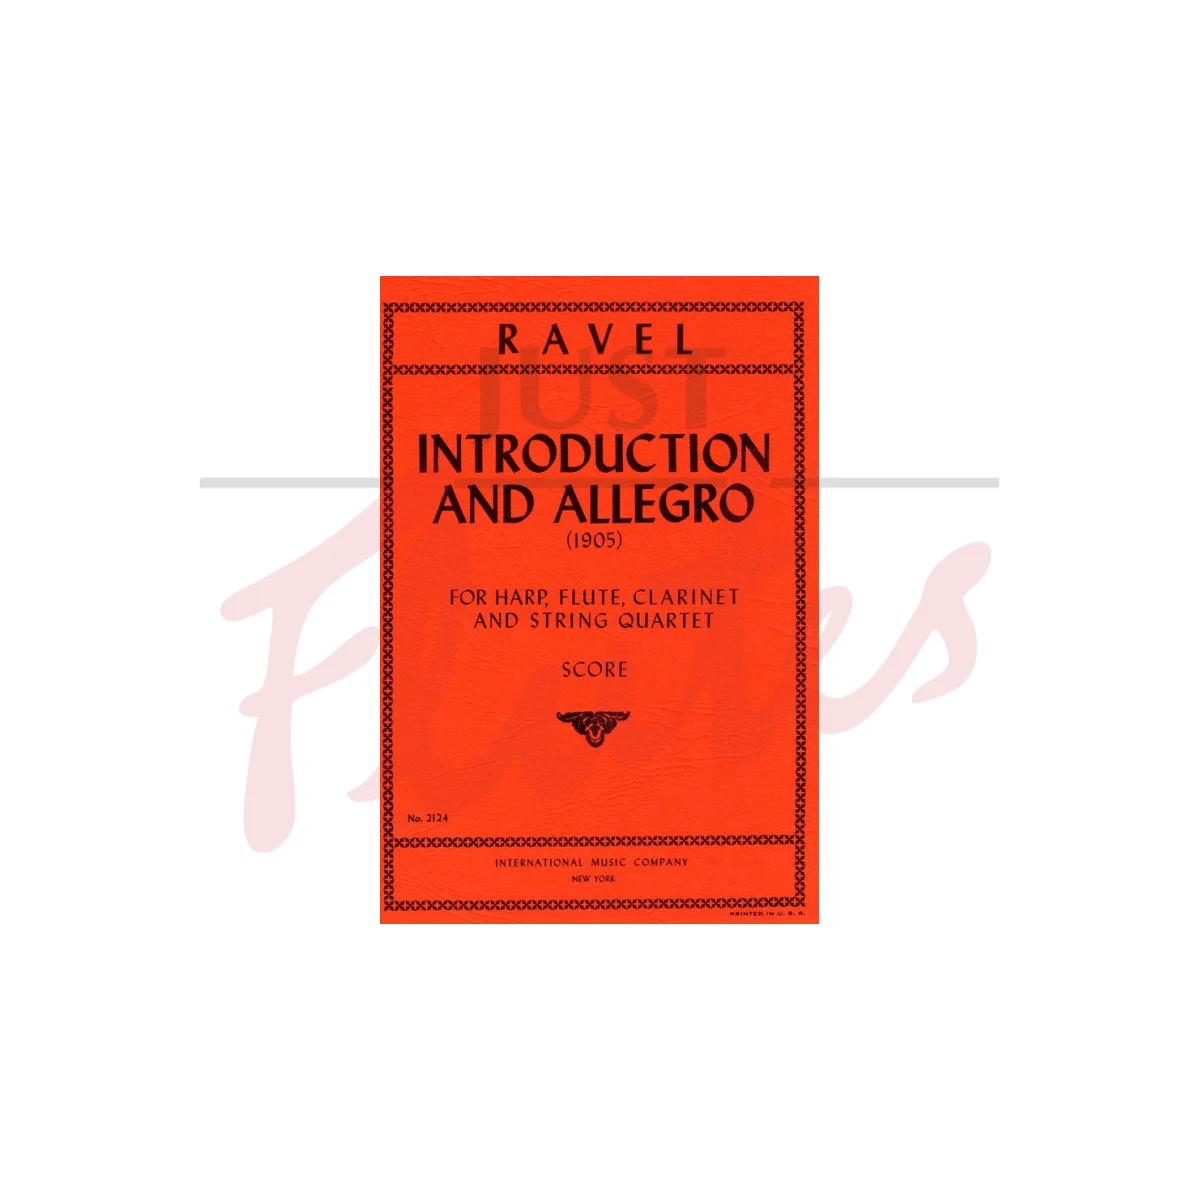 Introduction and Allegro for Harp, Flute, Clarinet and String Quartet